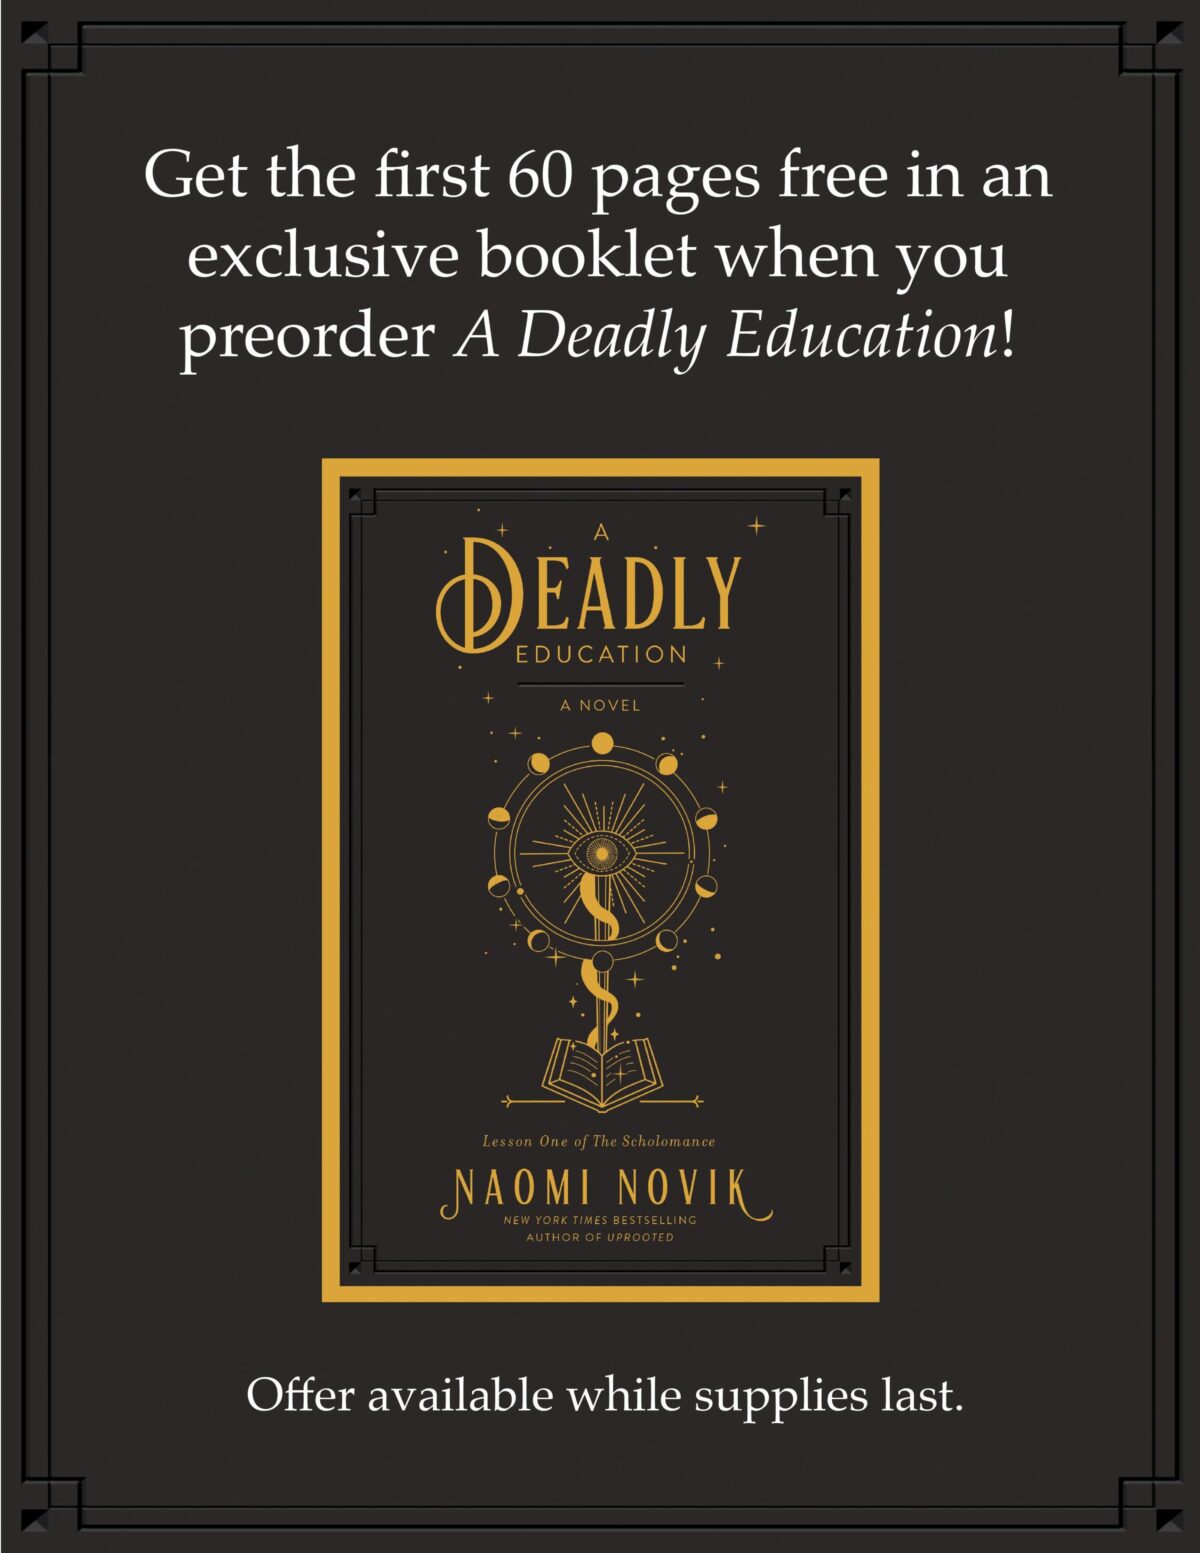 a deadly education book 1